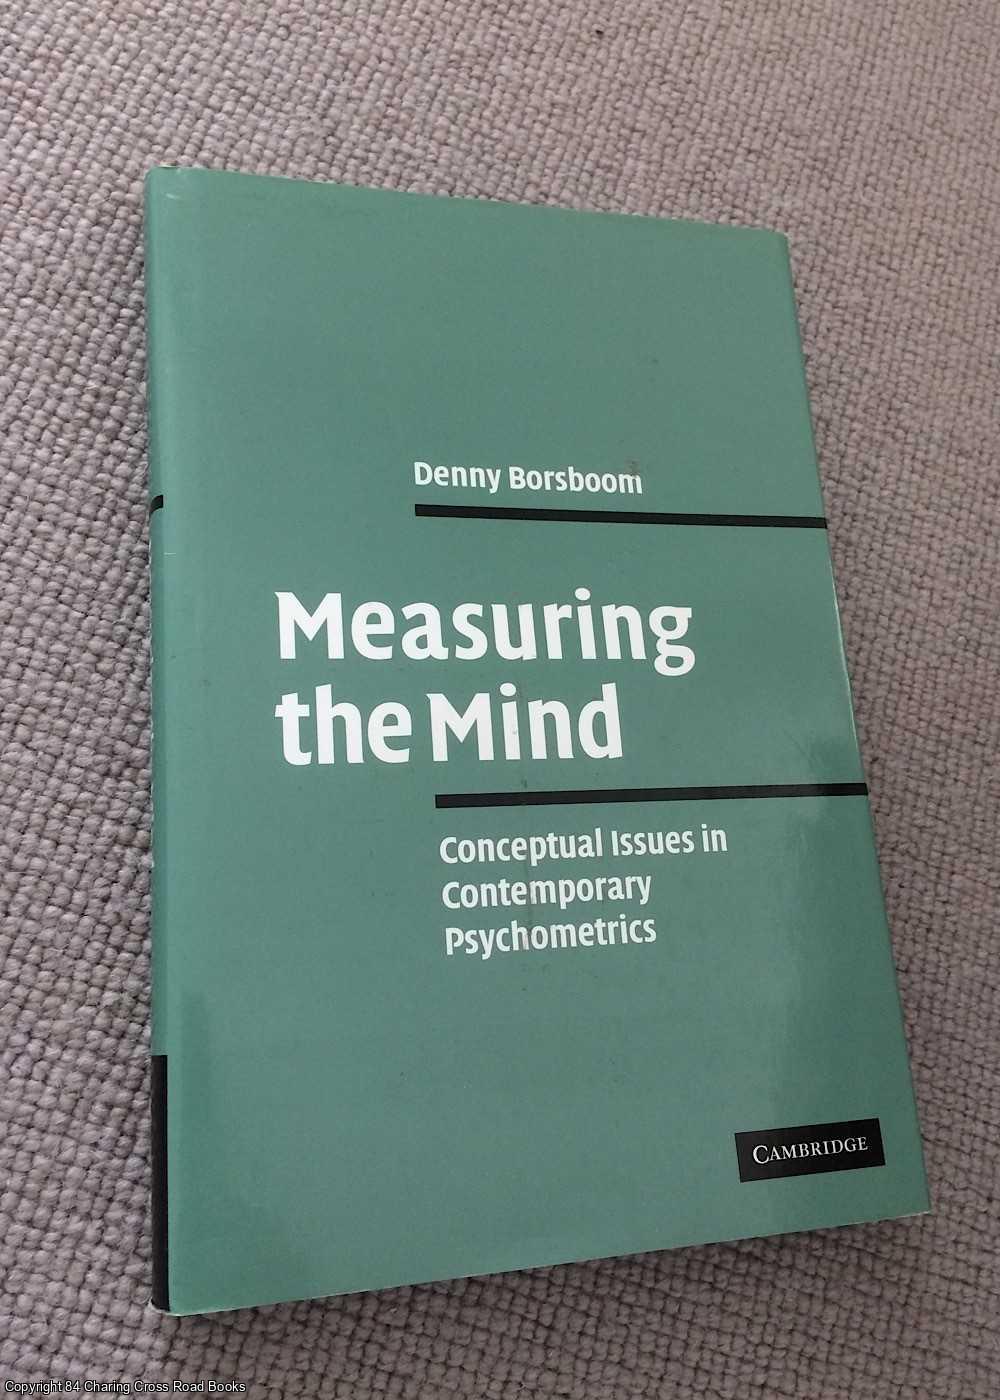 Borsboom, Denny - Measuring the Mind: Conceptual Issues in Contemporary Psychometrics